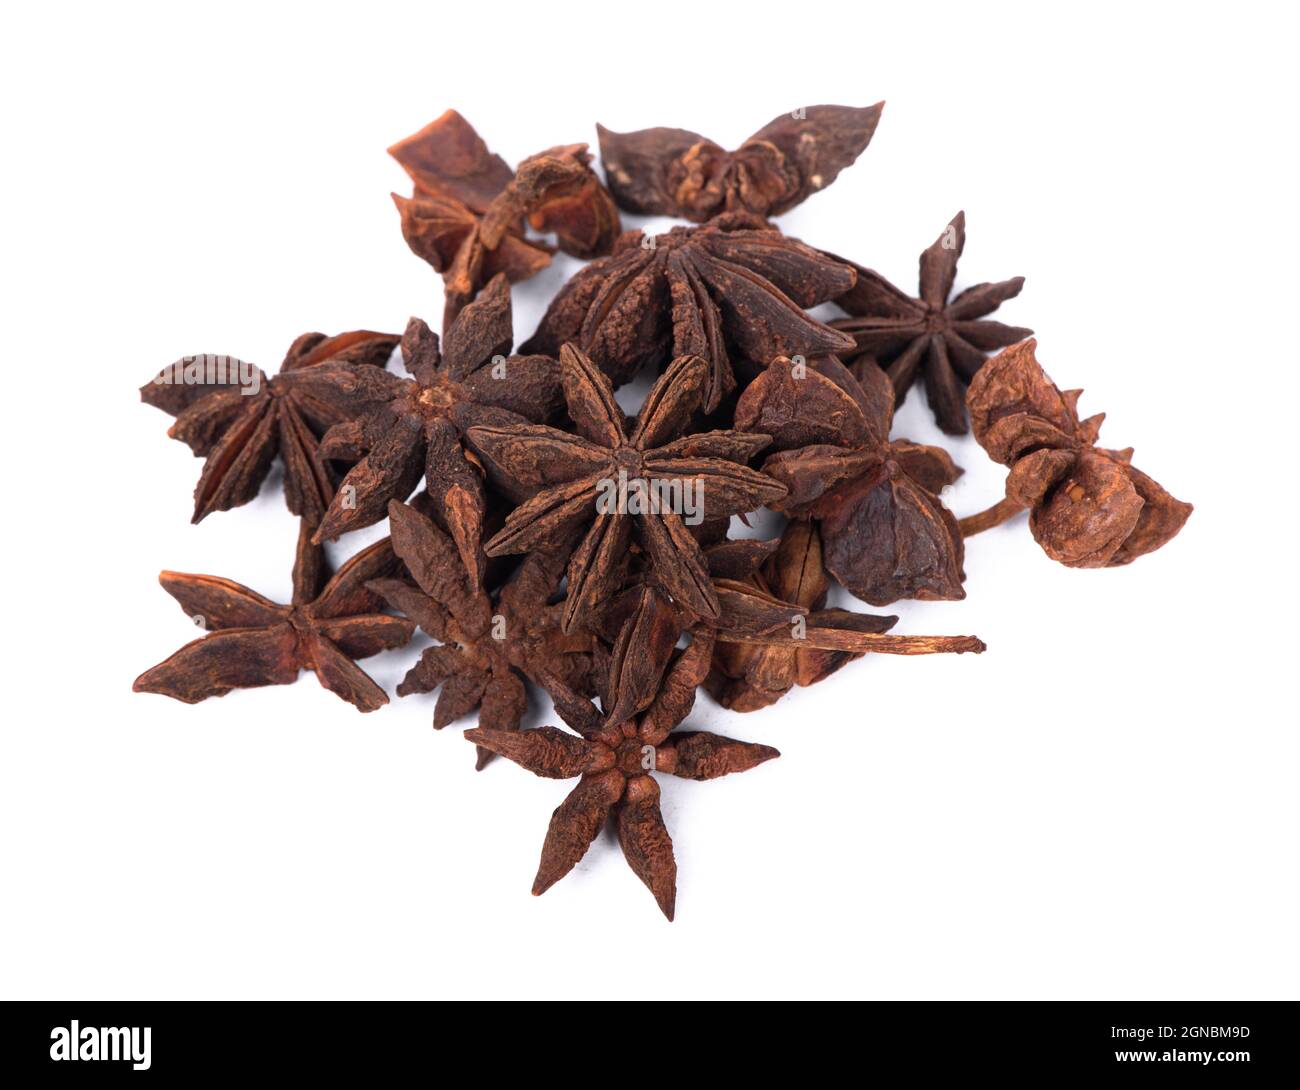 Heap of dry anise stars isolated on white background Stock Photo